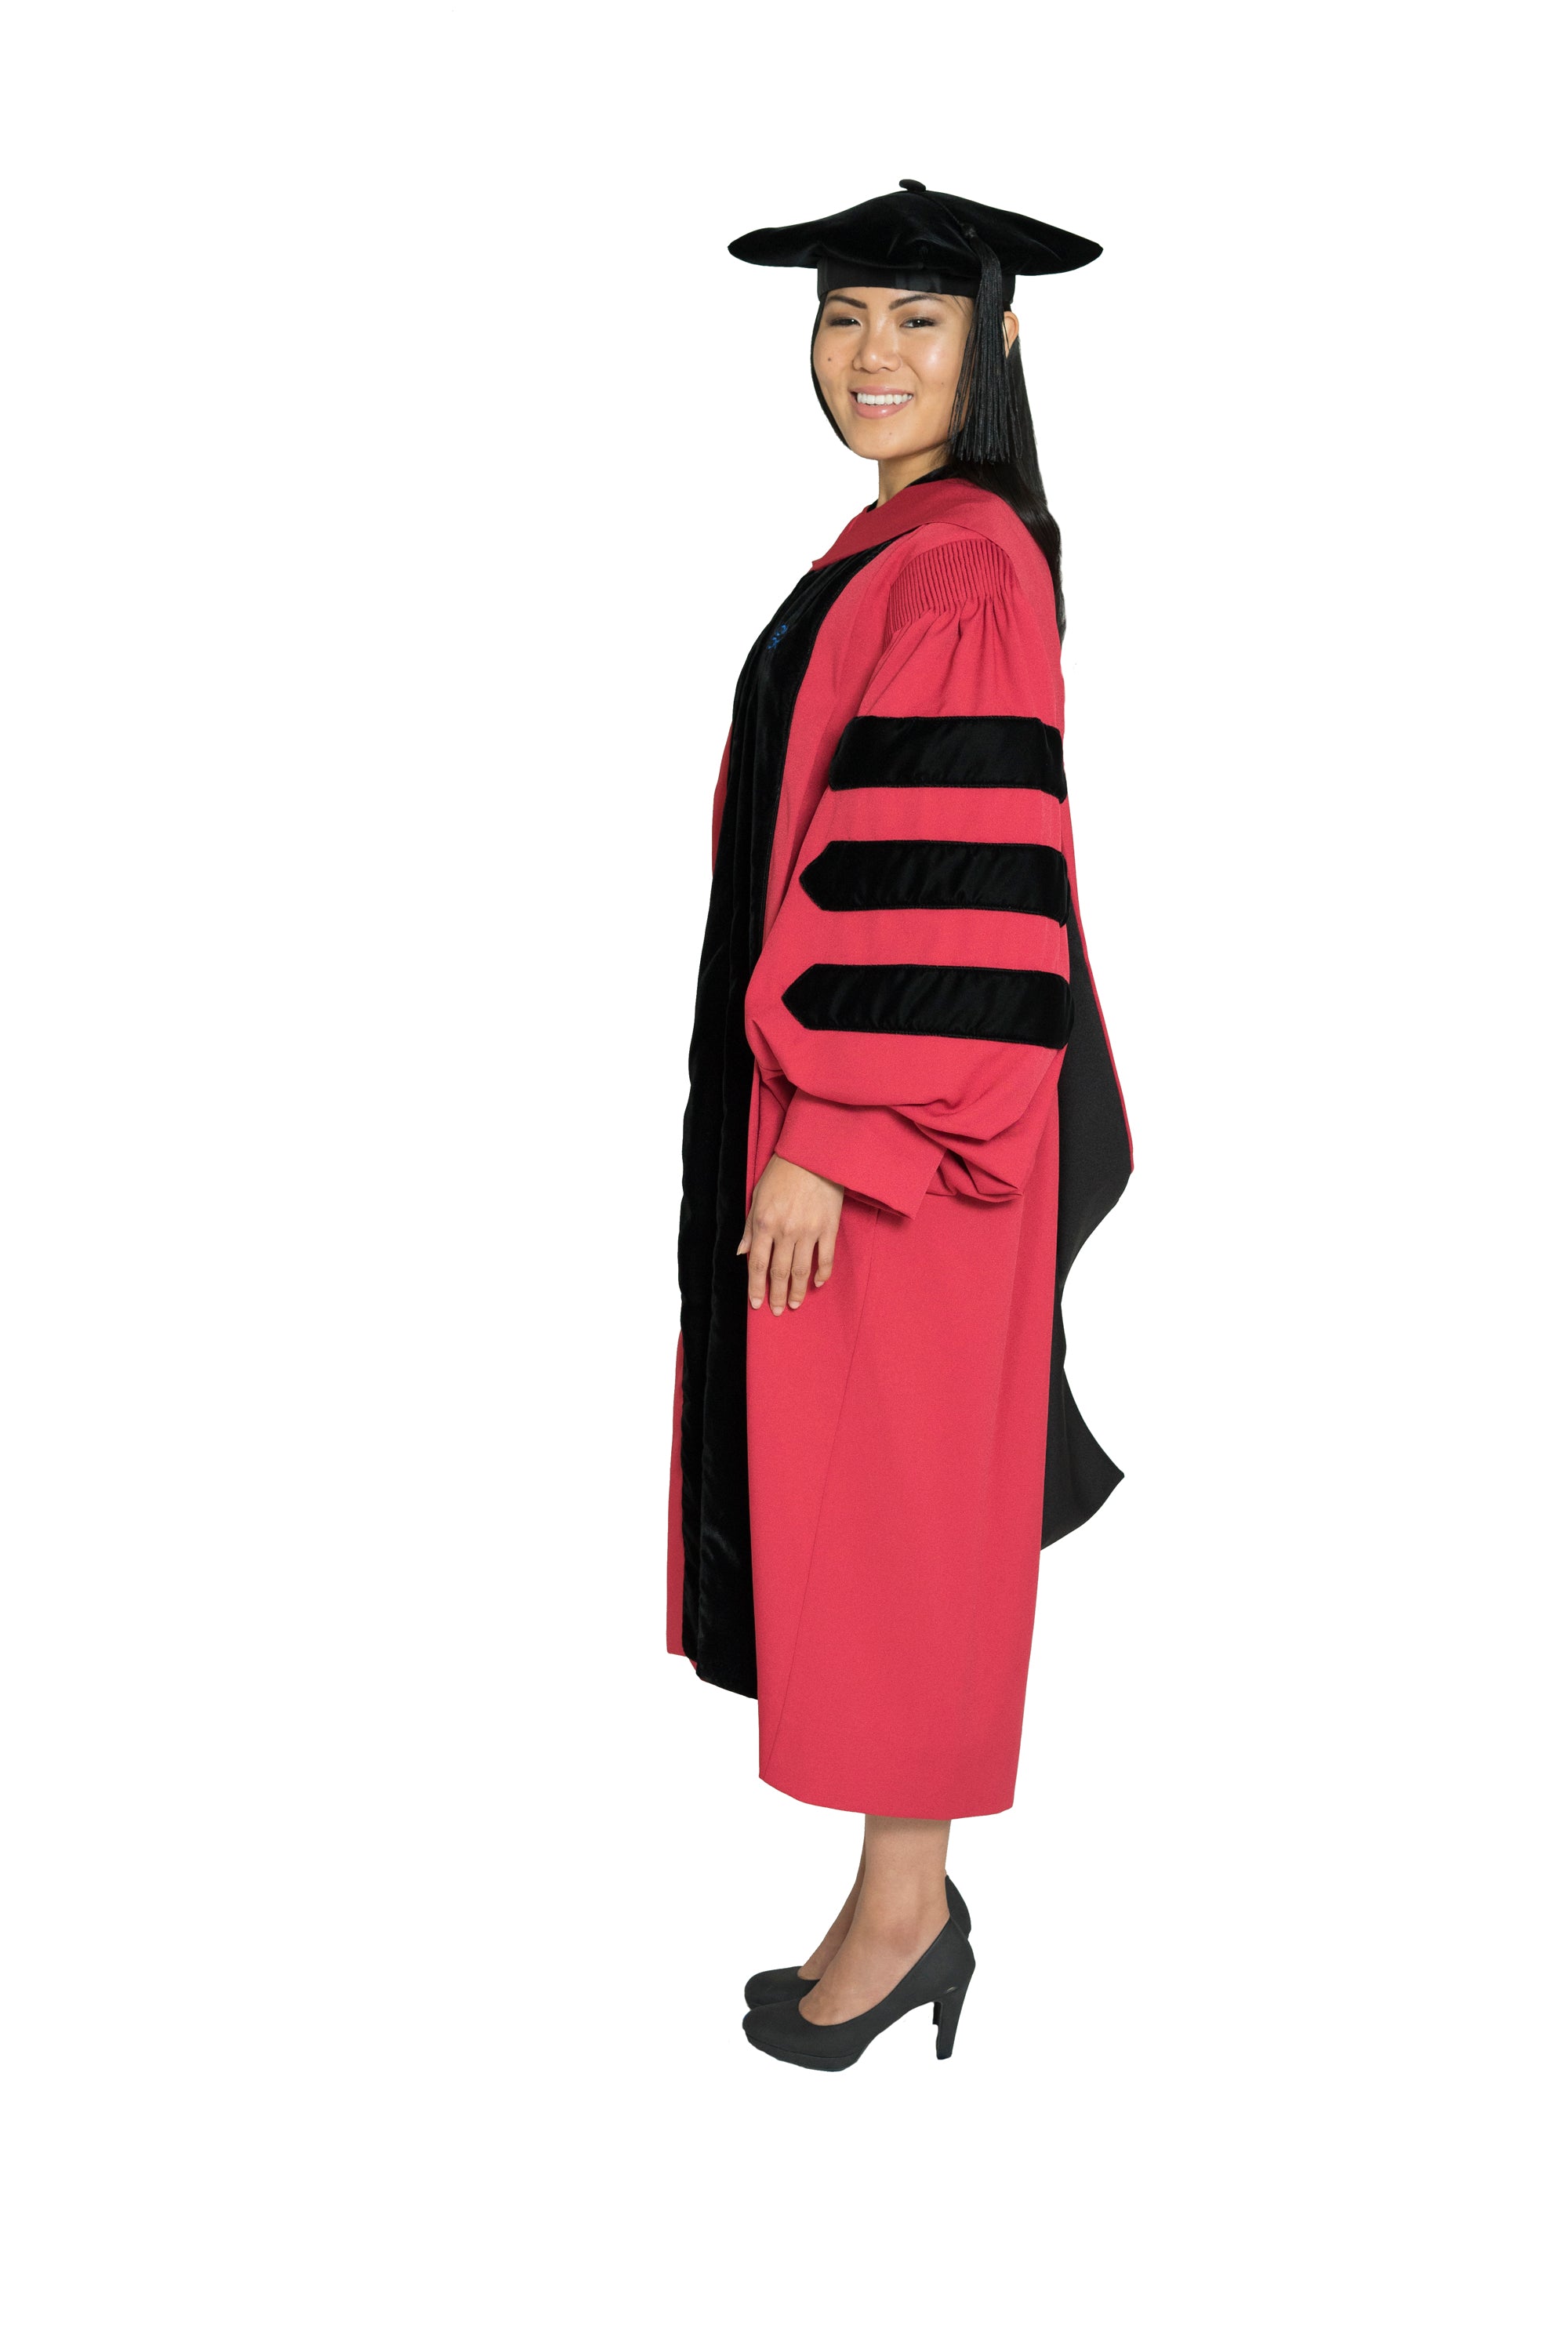 Harvard Commencement - Doctoral Regalia - Gowns, Hoods, Tams – CAPGOWN